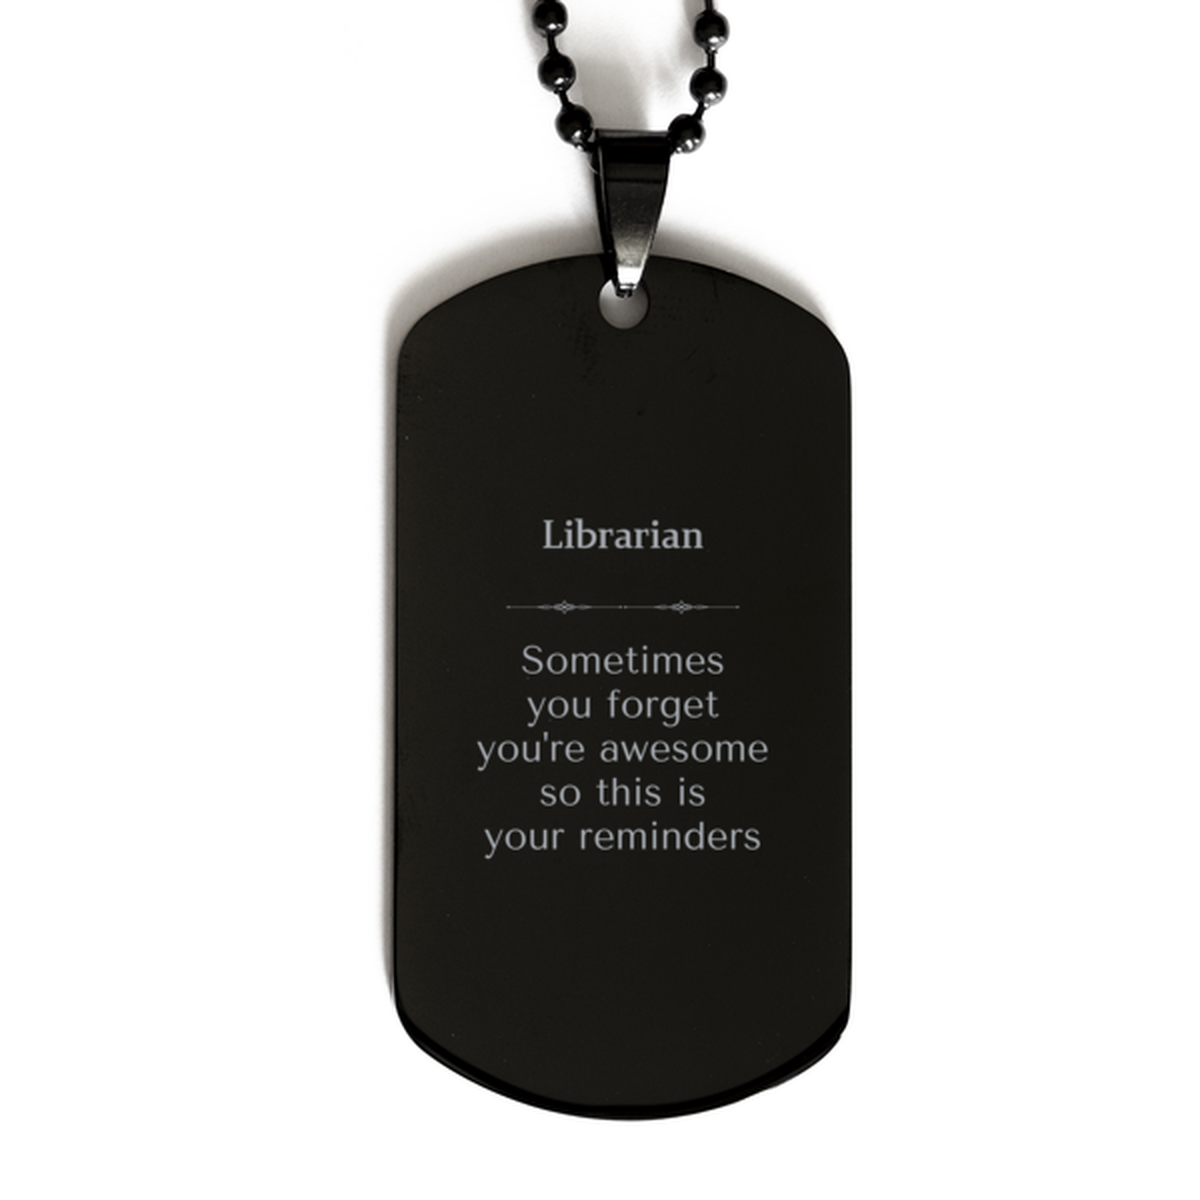 Sentimental Librarian Black Dog Tag, Librarian Sometimes you forget you're awesome so this is your reminders, Graduation Christmas Birthday Gifts for Librarian, Men, Women, Coworkers